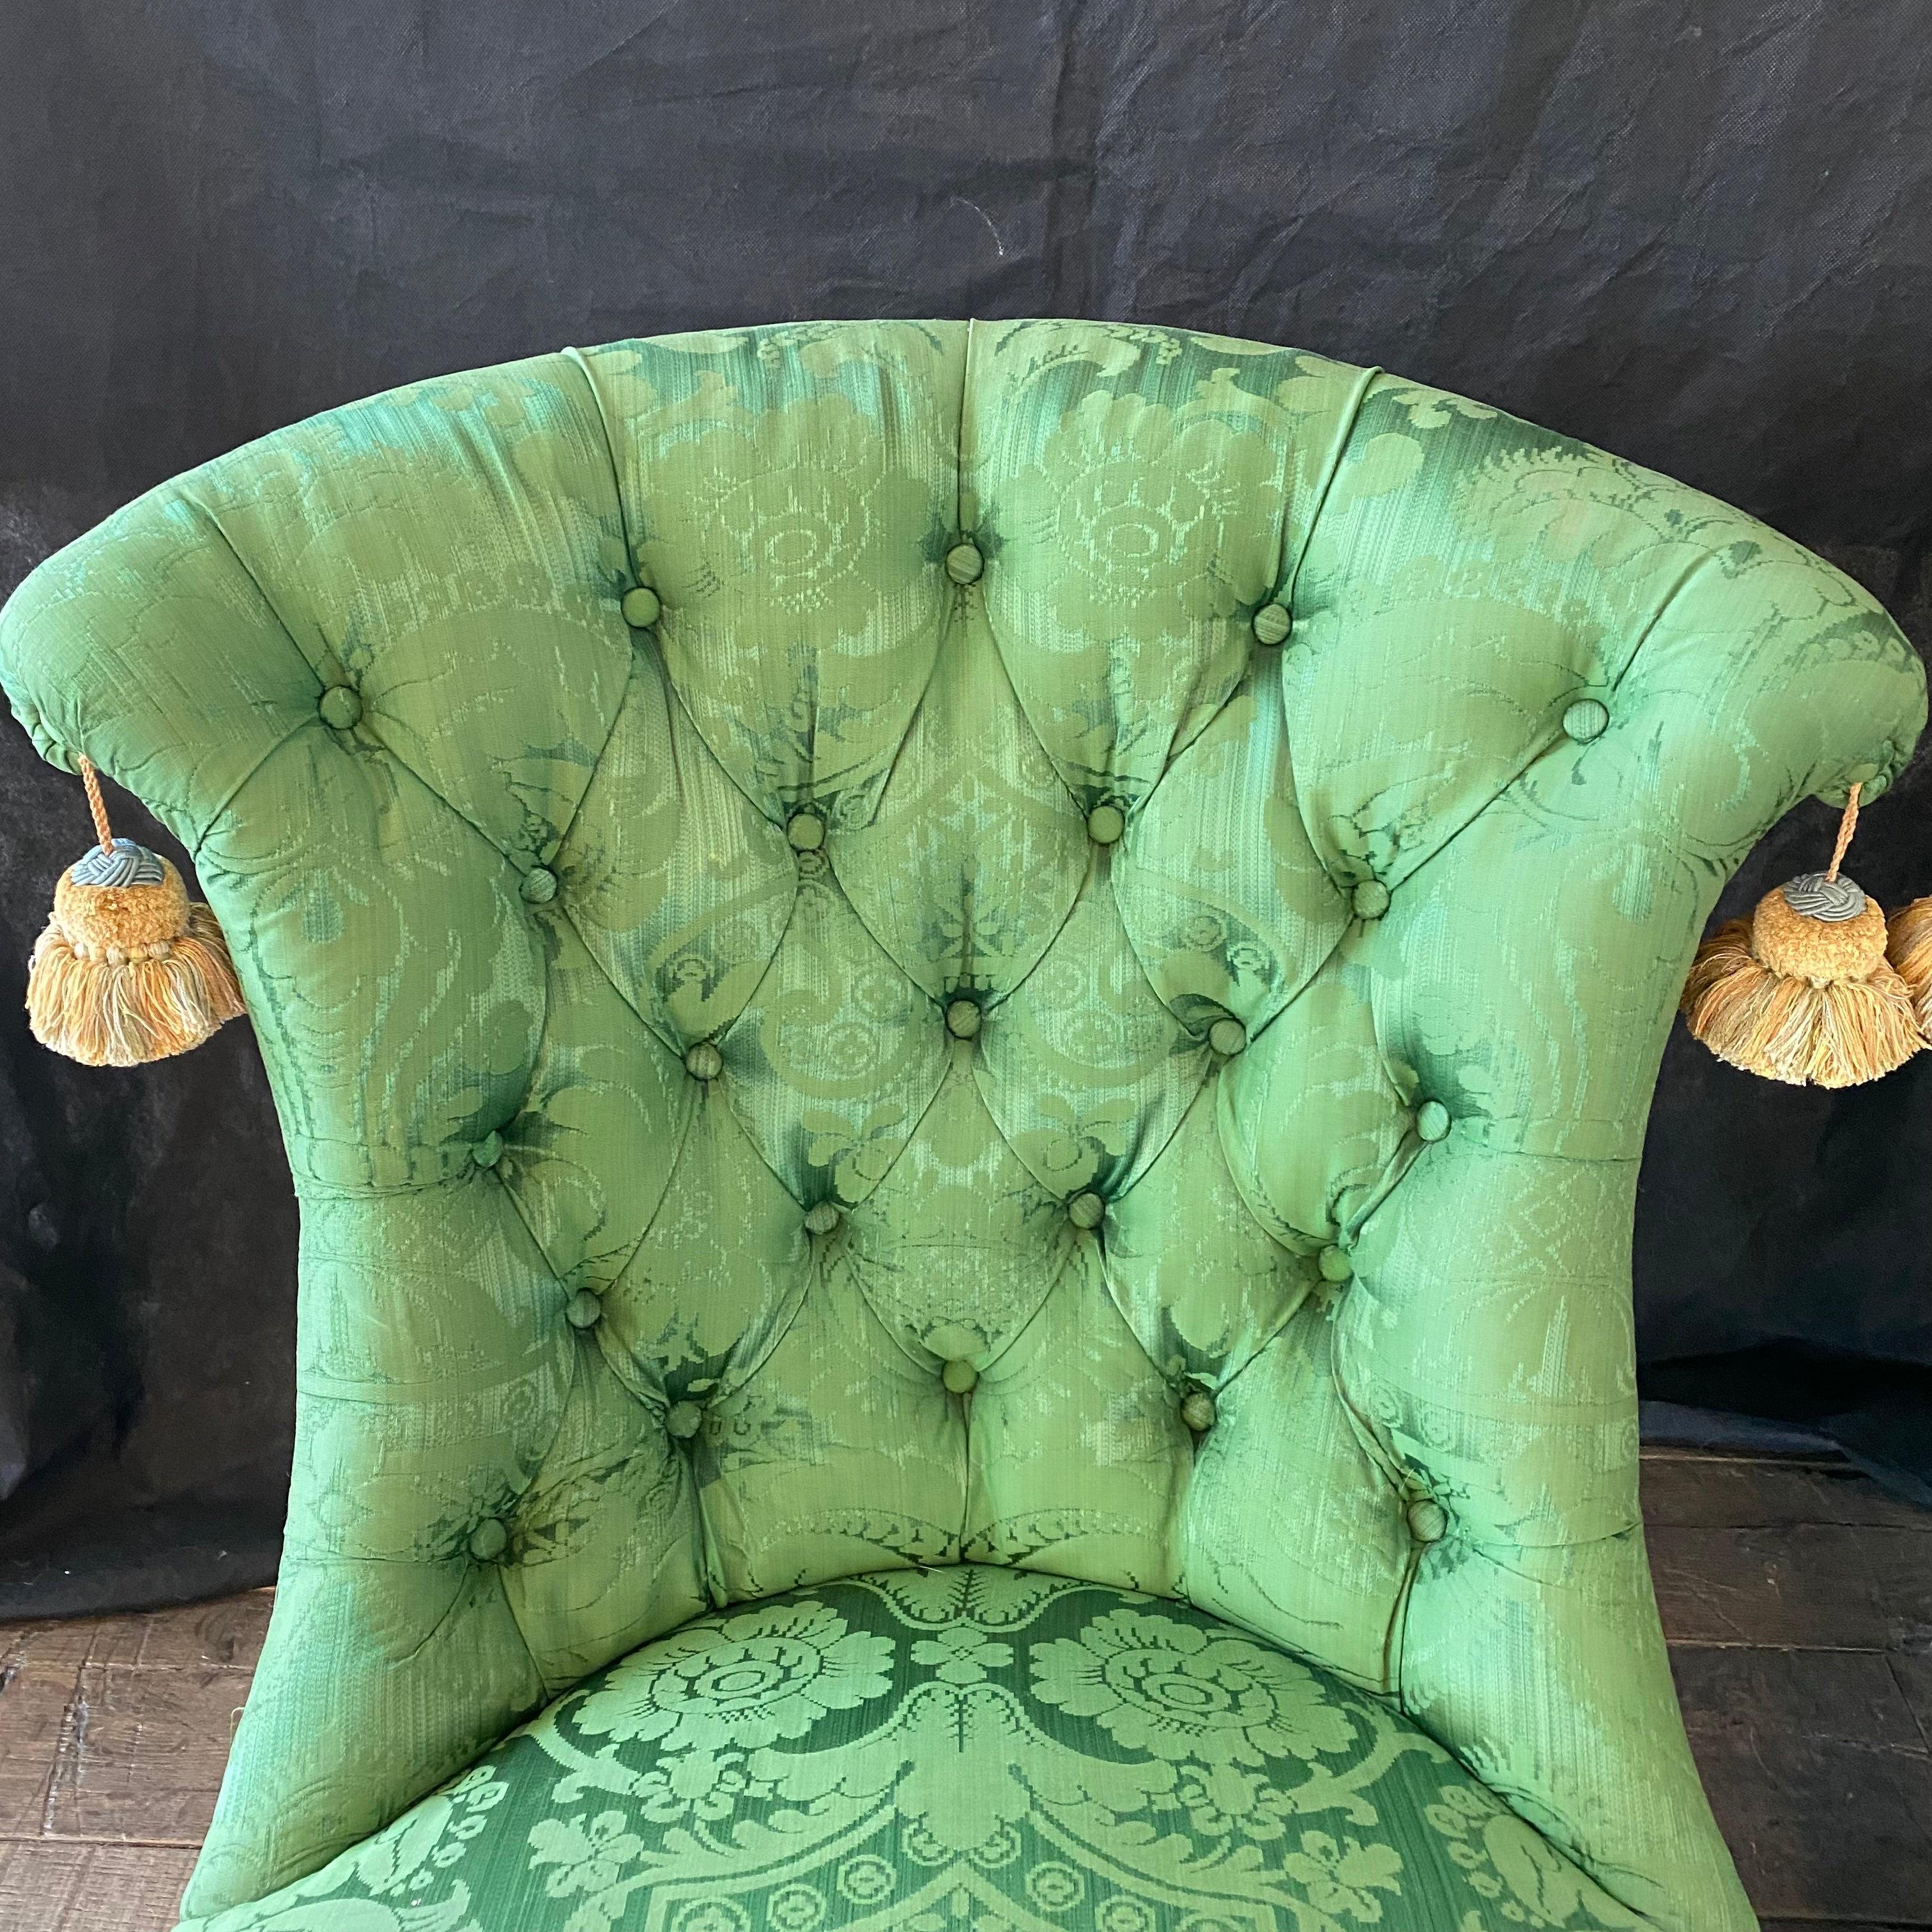 Sumptuous French Napoleon III green silk tufted back slipper chair with ebony turned legs, having a gold fringed trim. Mild sun bleaching on back; priced accordingly   #5648 

 